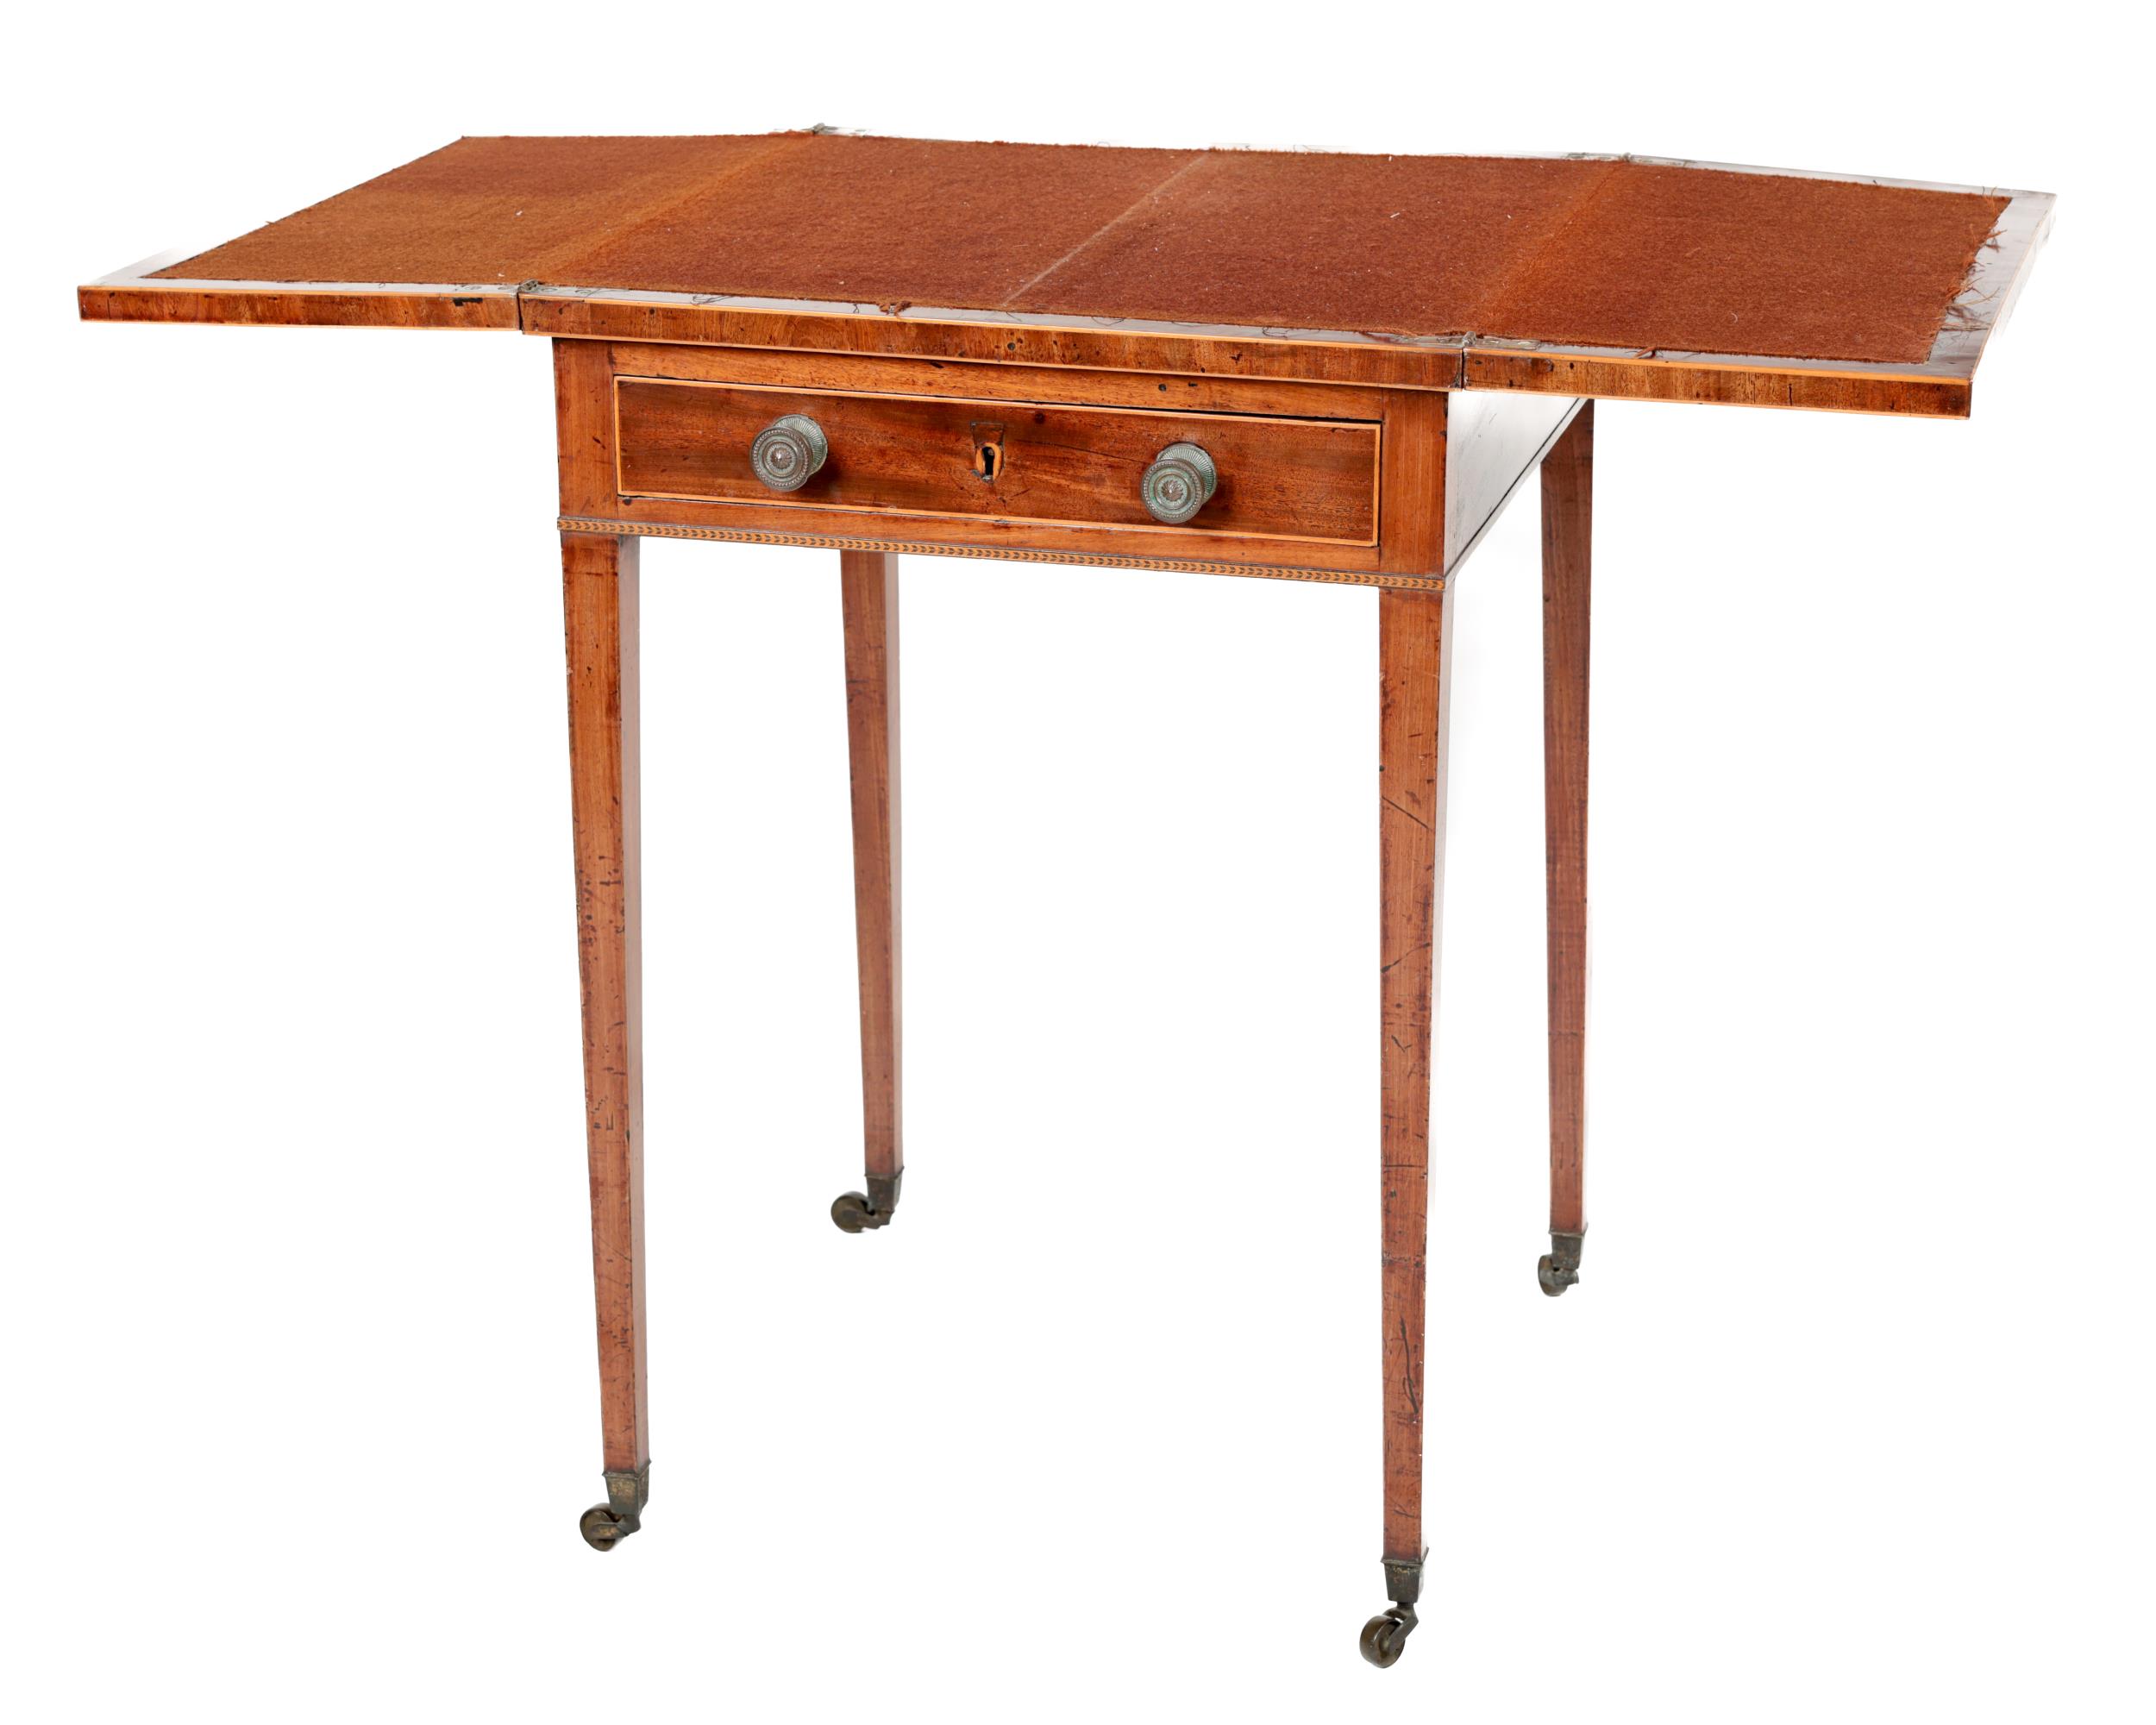 A Regency period mahogany square top fold-out Card Table, the top with satinwood string inlay, above